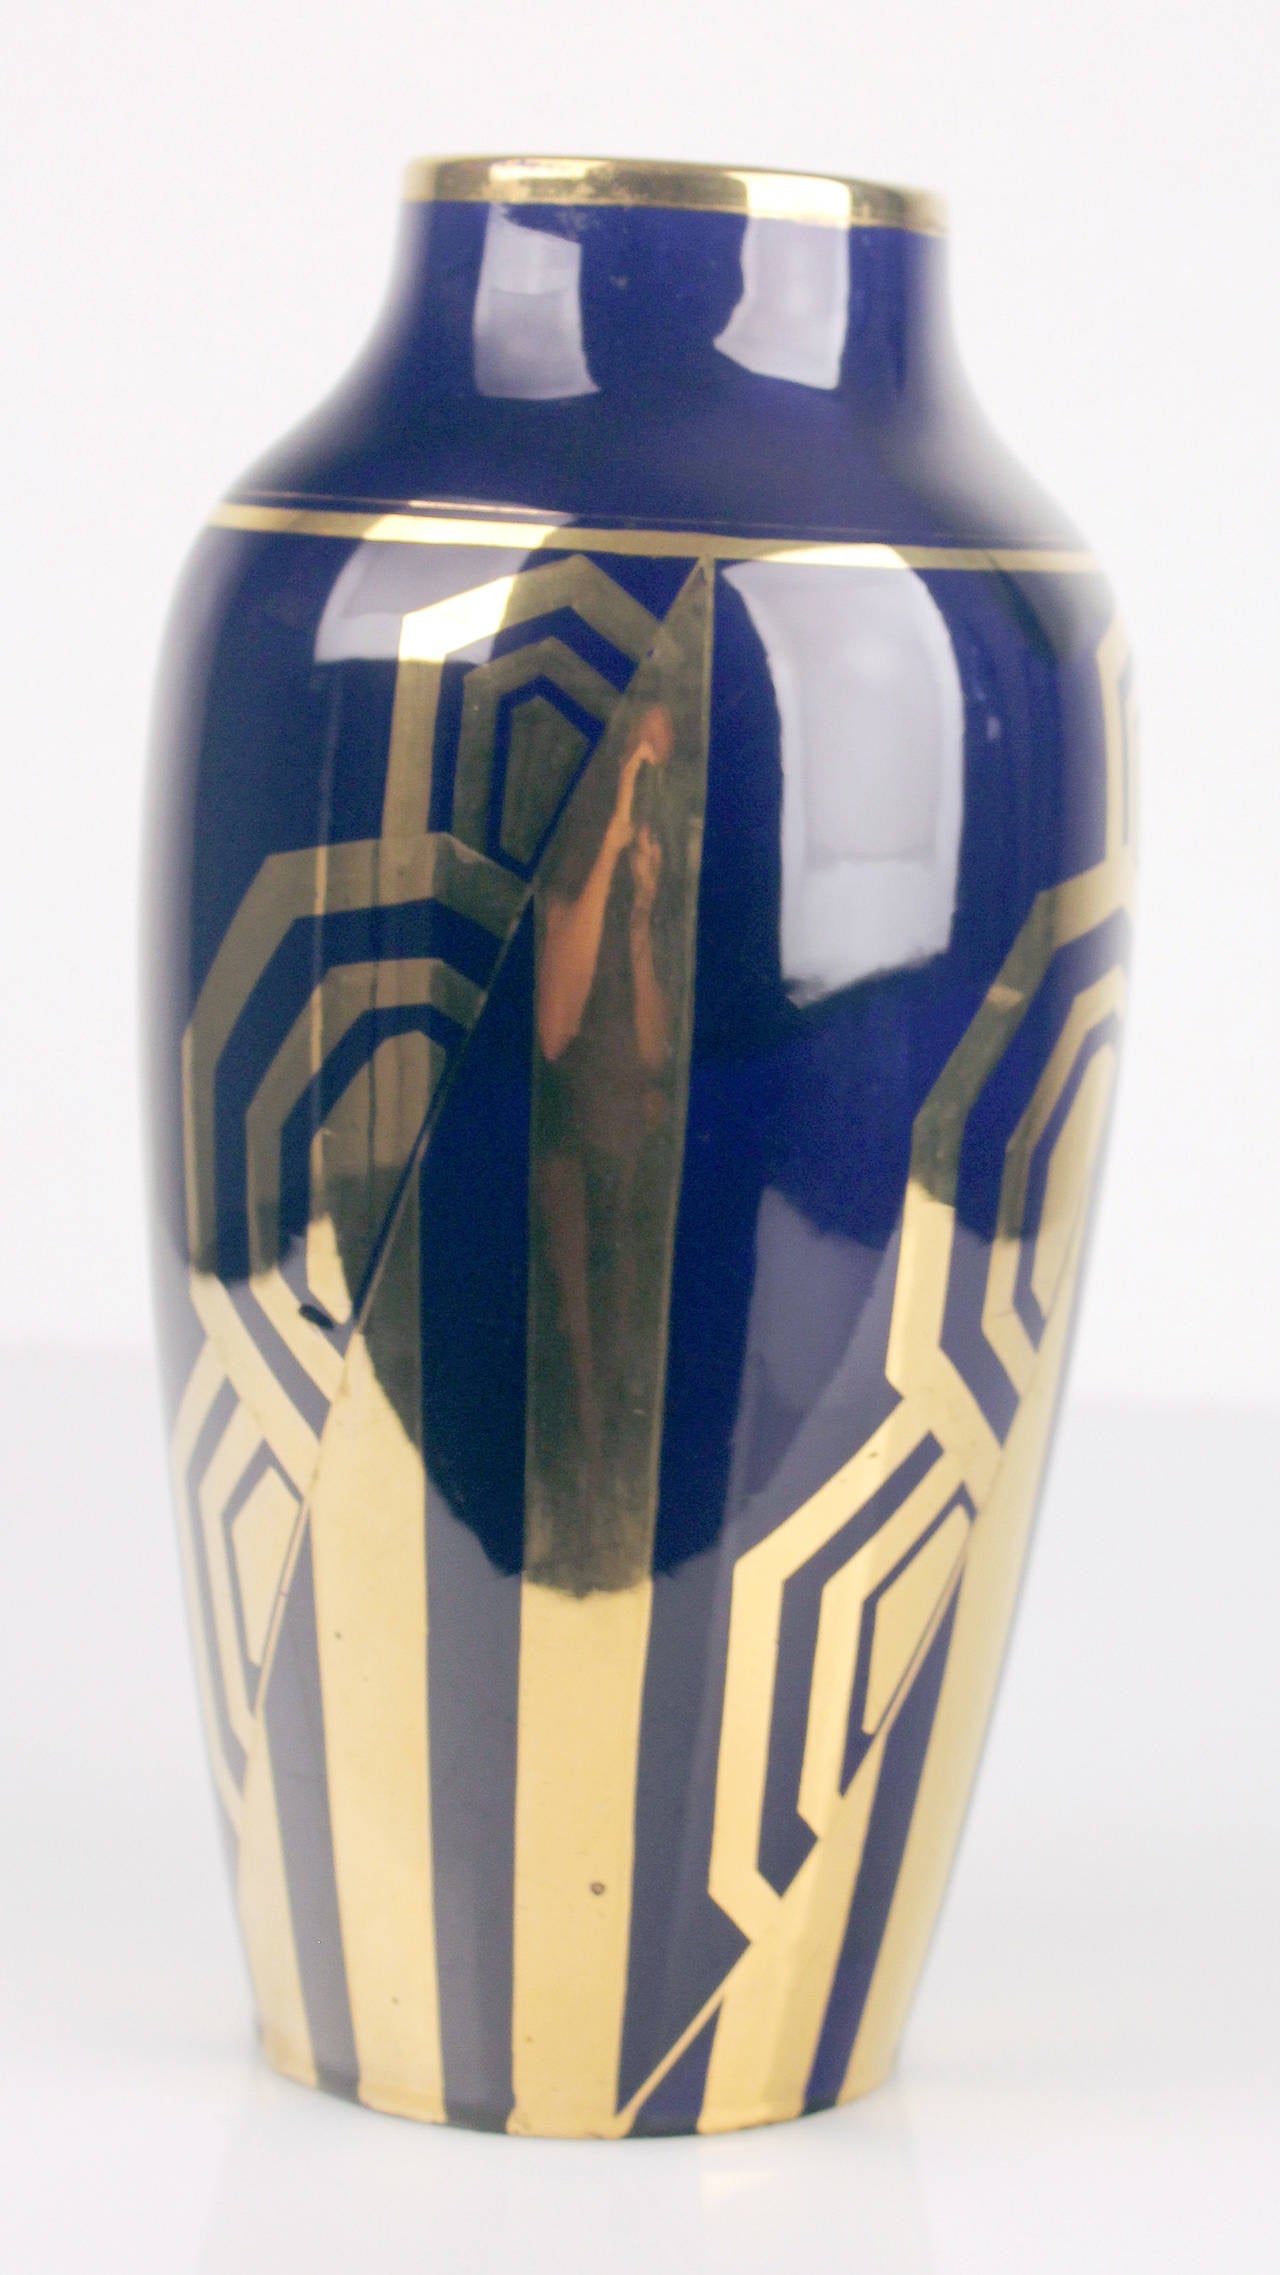 Large art deco vase manufactured by ODYV (standing for Odile BERLOT et Yvonne MUSSIER) around 1925

A typical and wonderful example of the french art deco style, it mixes elements of cubism, apparent in the gilded pattern which is repeated thrice